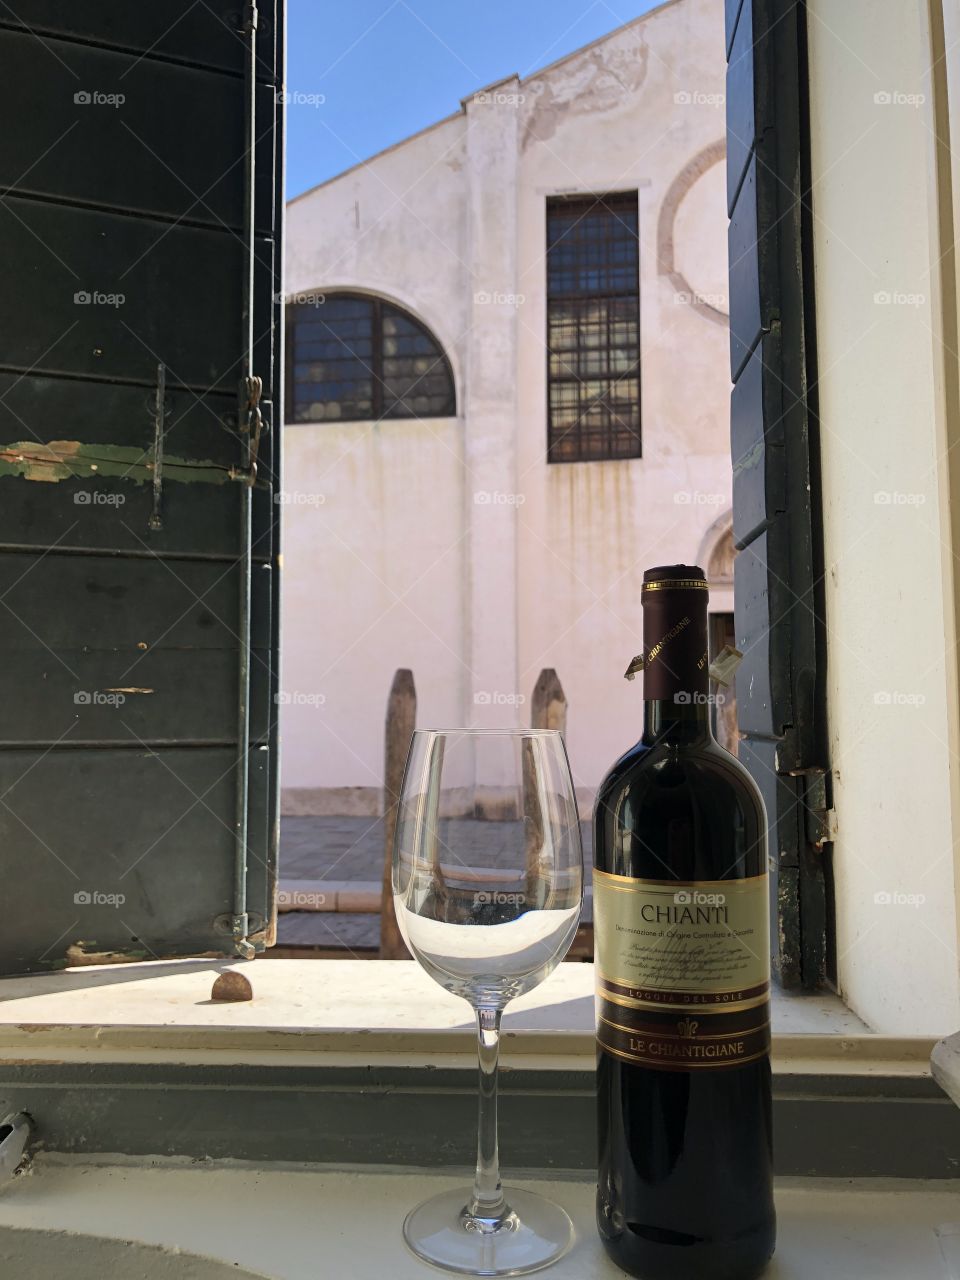 Wine at a Venetian window in Italy 2018